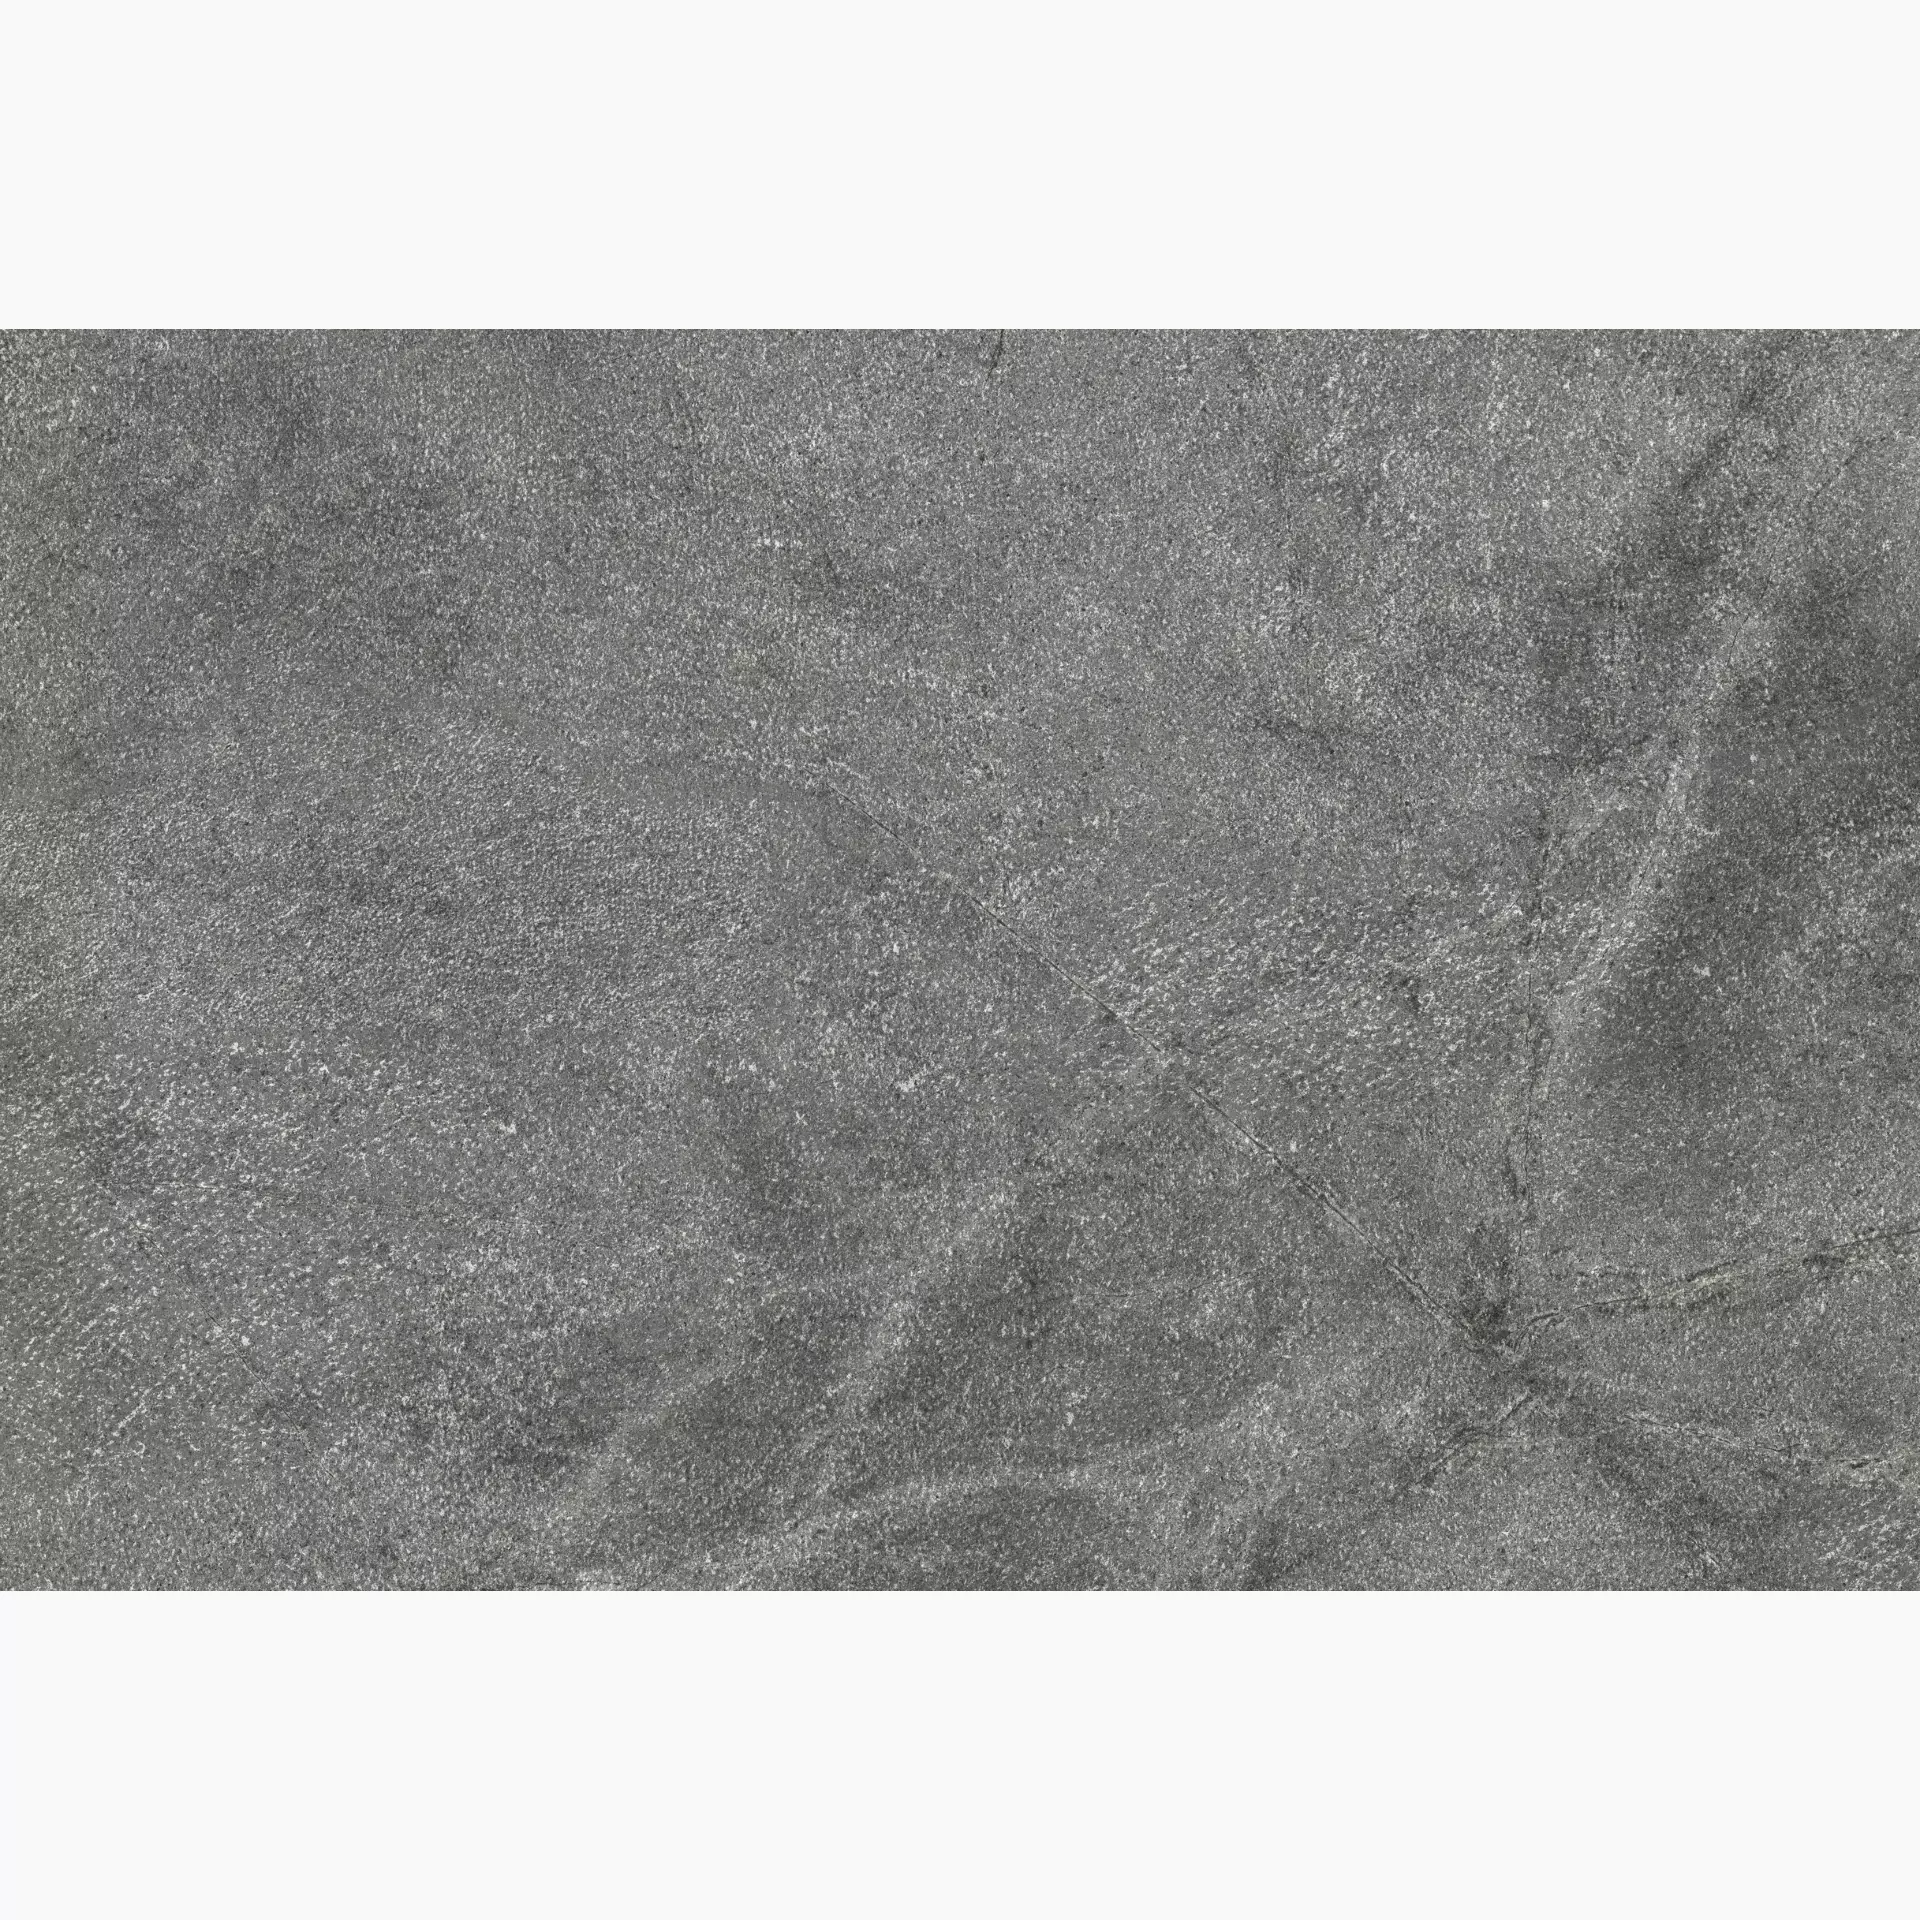 ABK Out.20 Atlantis Smoke Hammered Outdoor PF60007175 60x90cm rectified 20mm